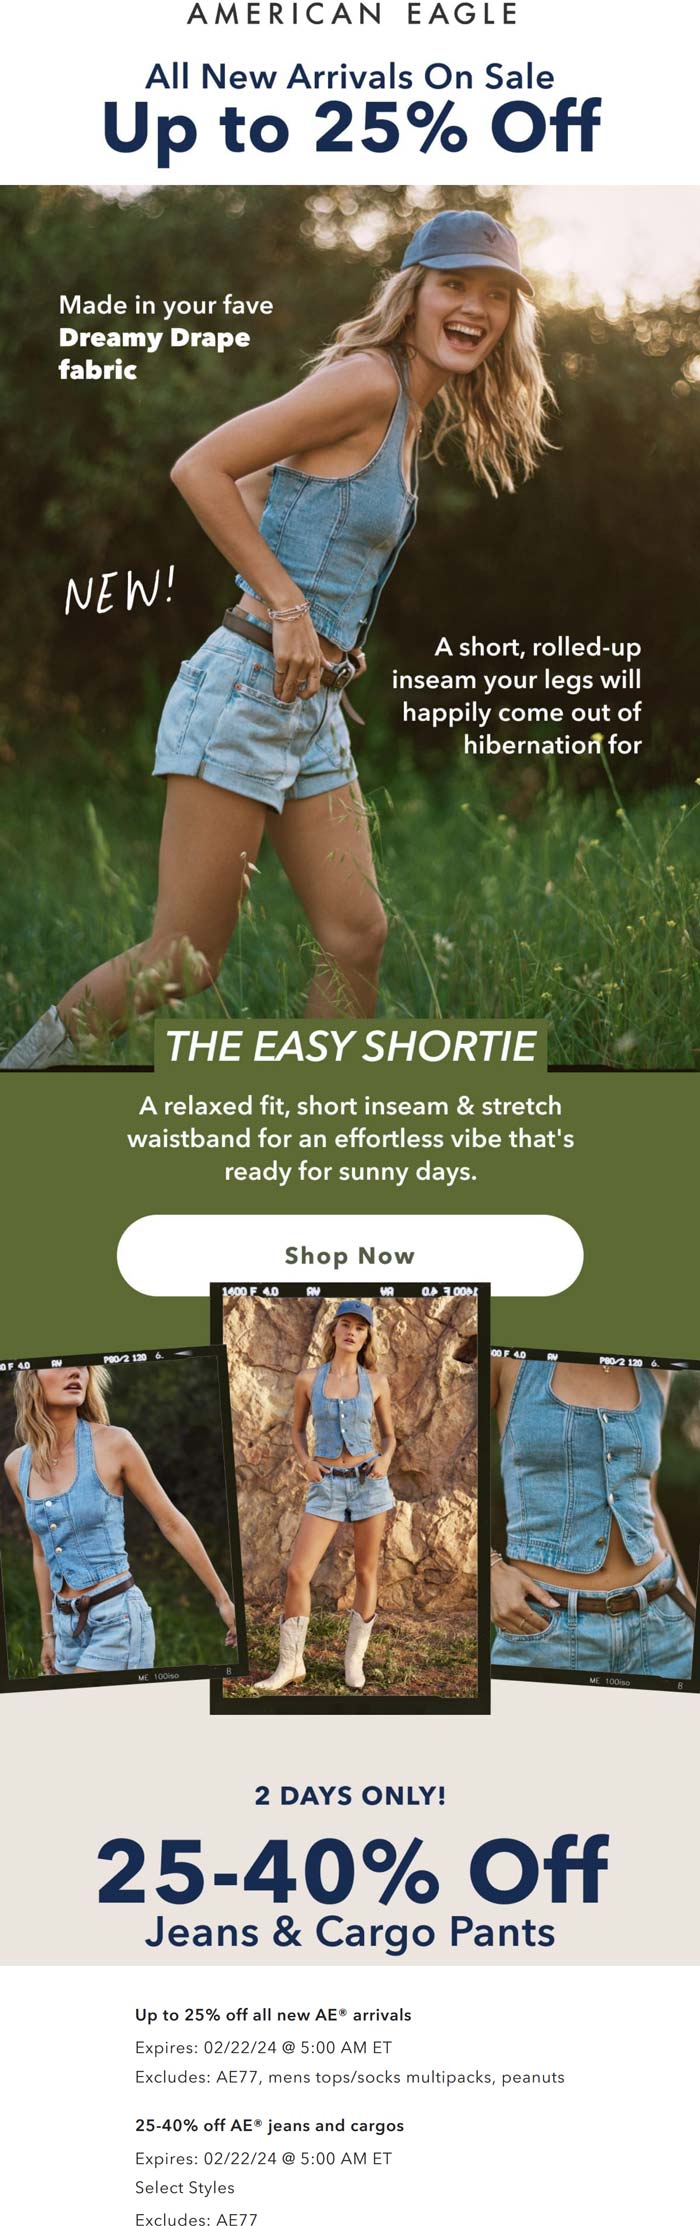 American Eagle stores Coupon  25-40% off all jeans & cargos at American Eagle #americaneagle 